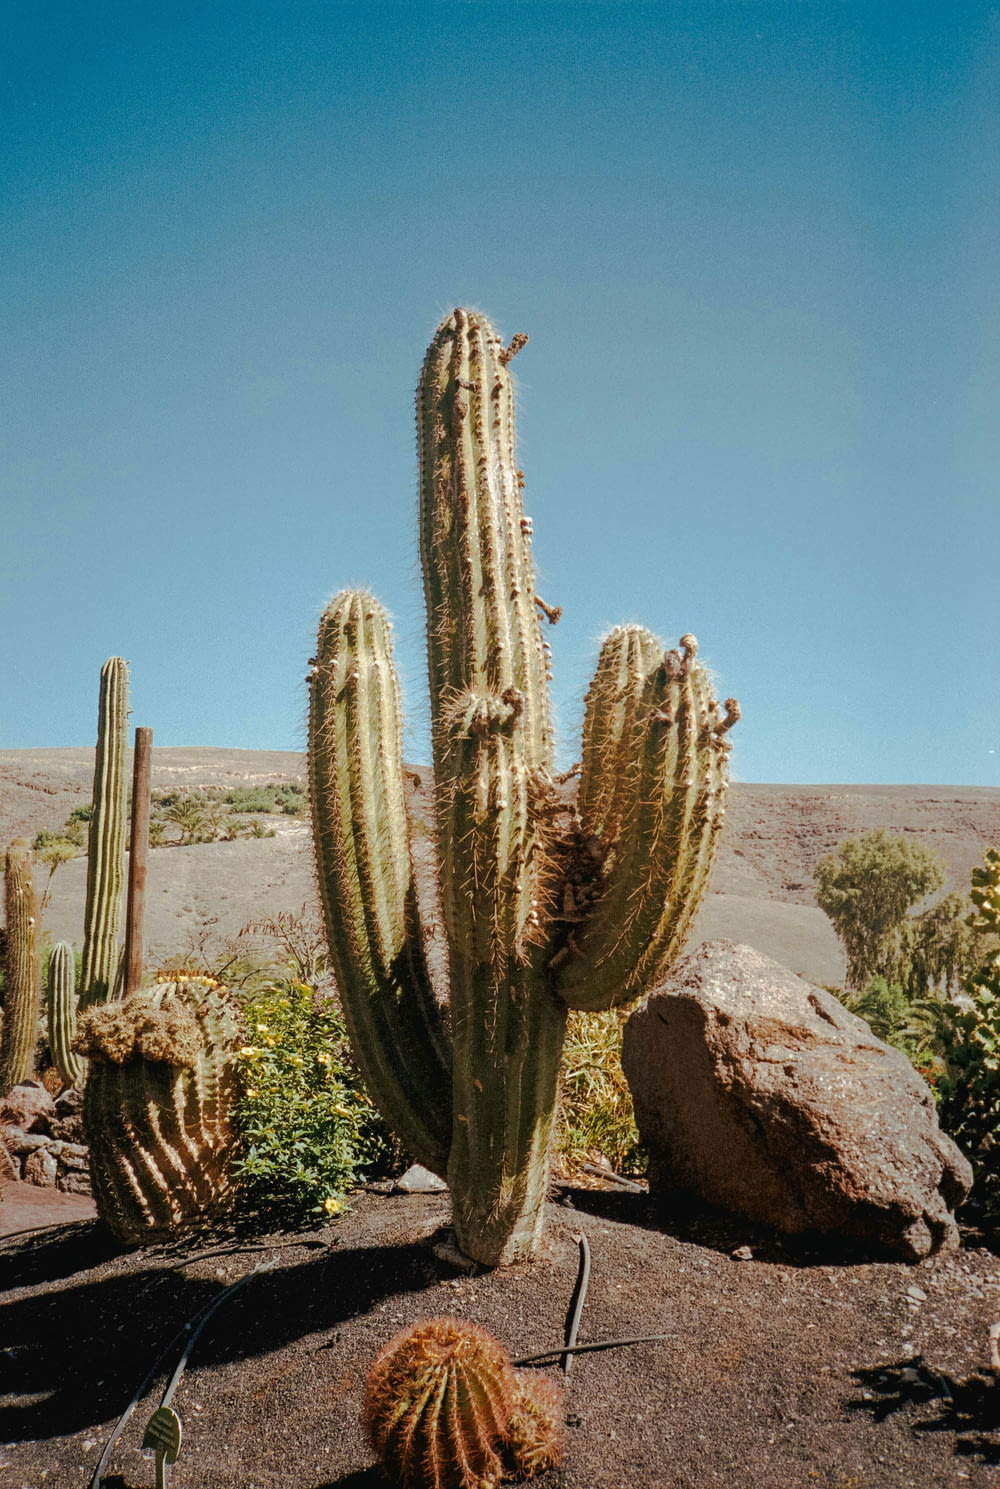 a group of cactus plants in a desert setting